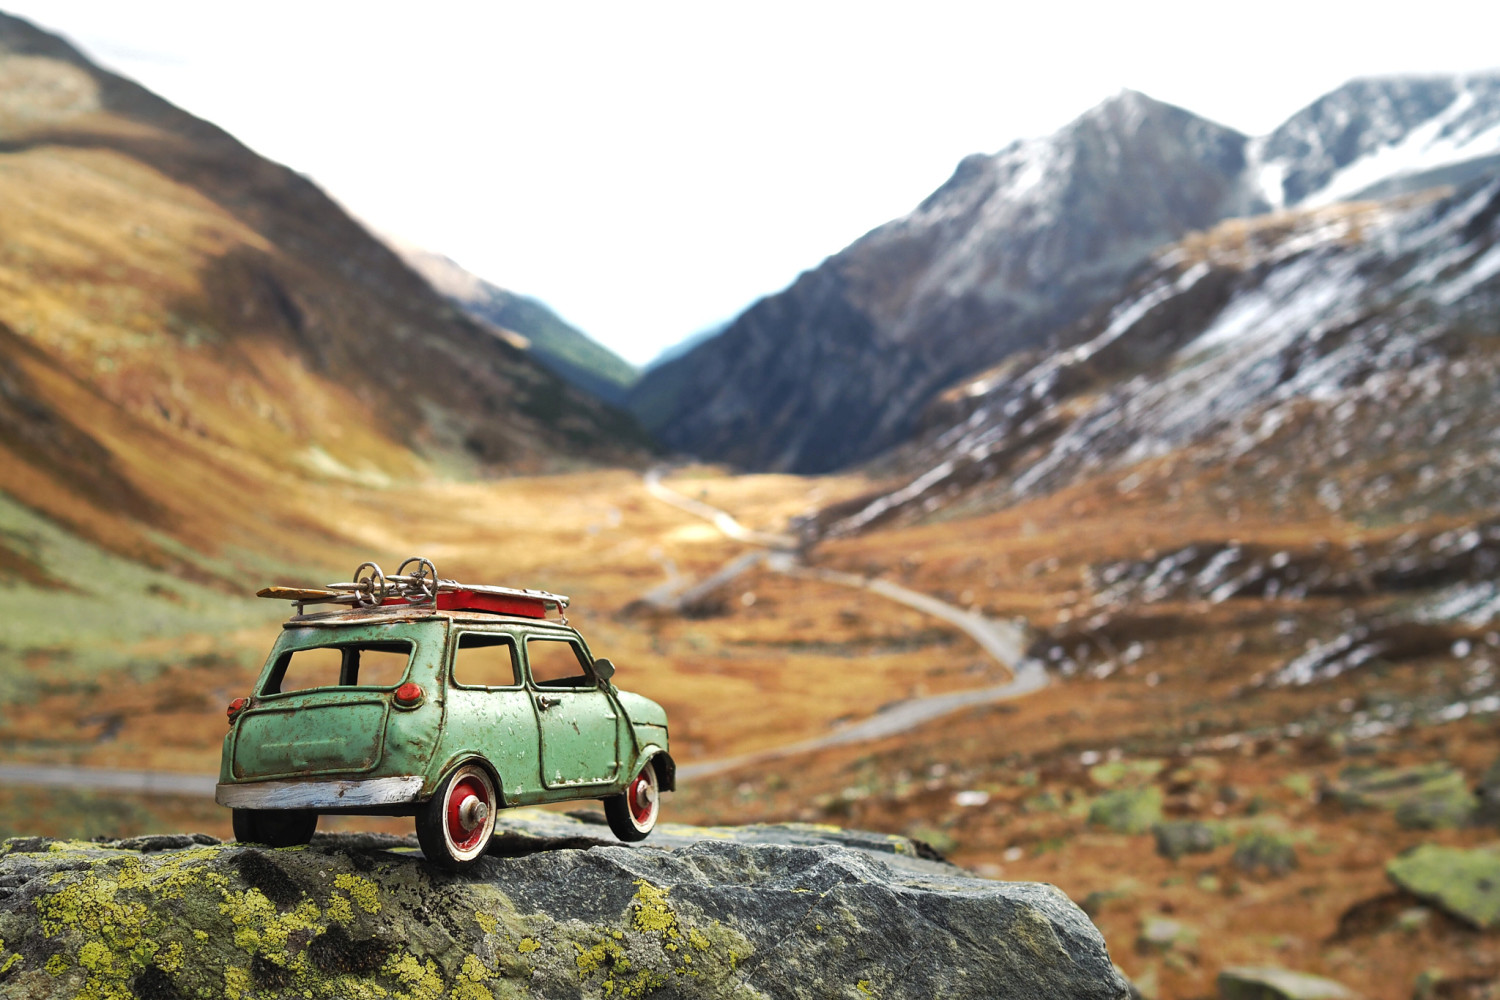 Exploring the World with Kim Leuenberger and Her Tiny Cars